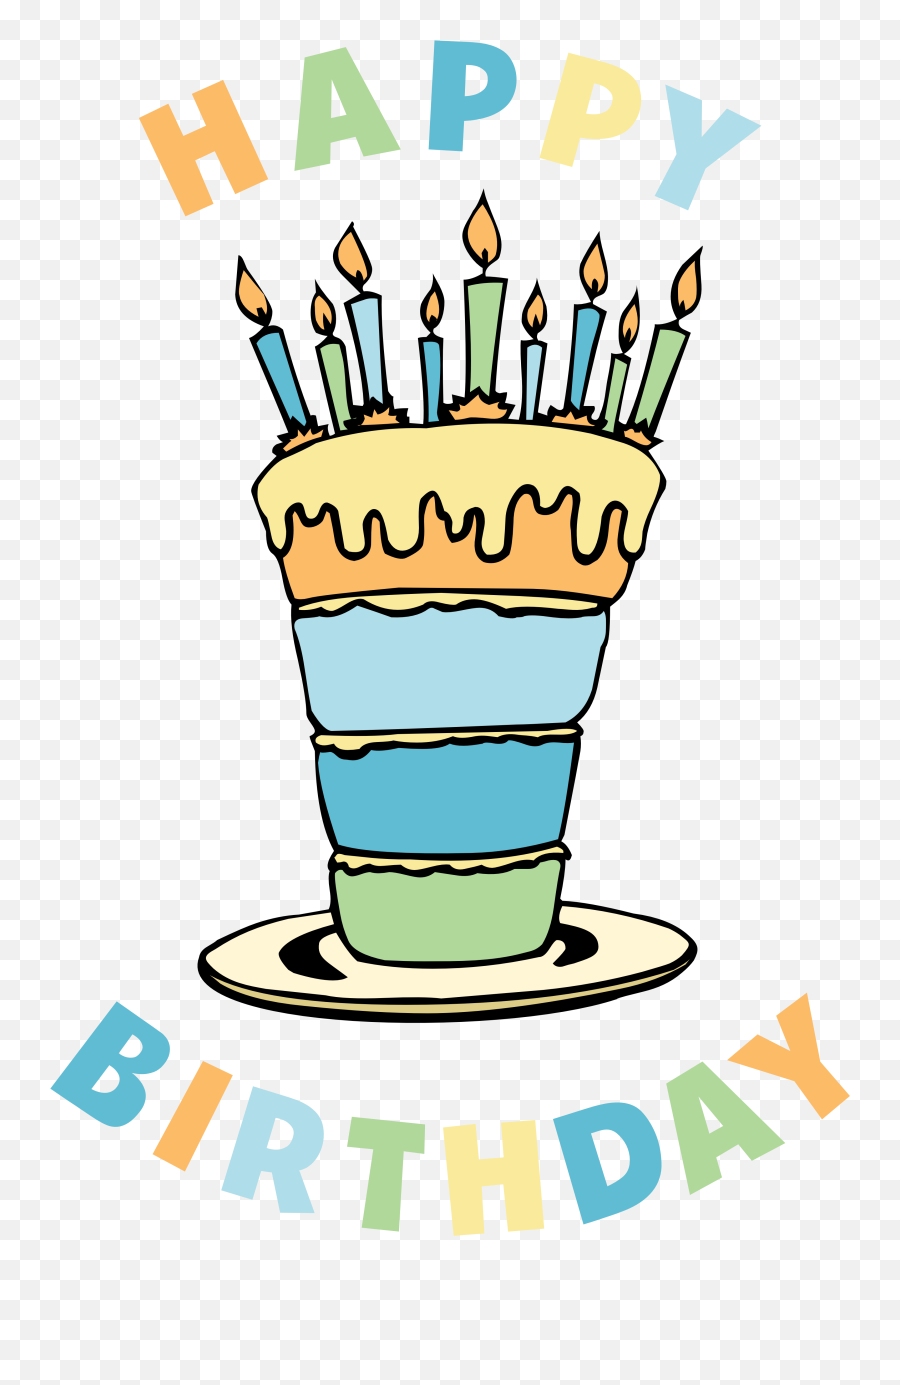 Clipart Of High Birthday Cake With Candles Free Image Download Emoji,Birthday Candles Clipart